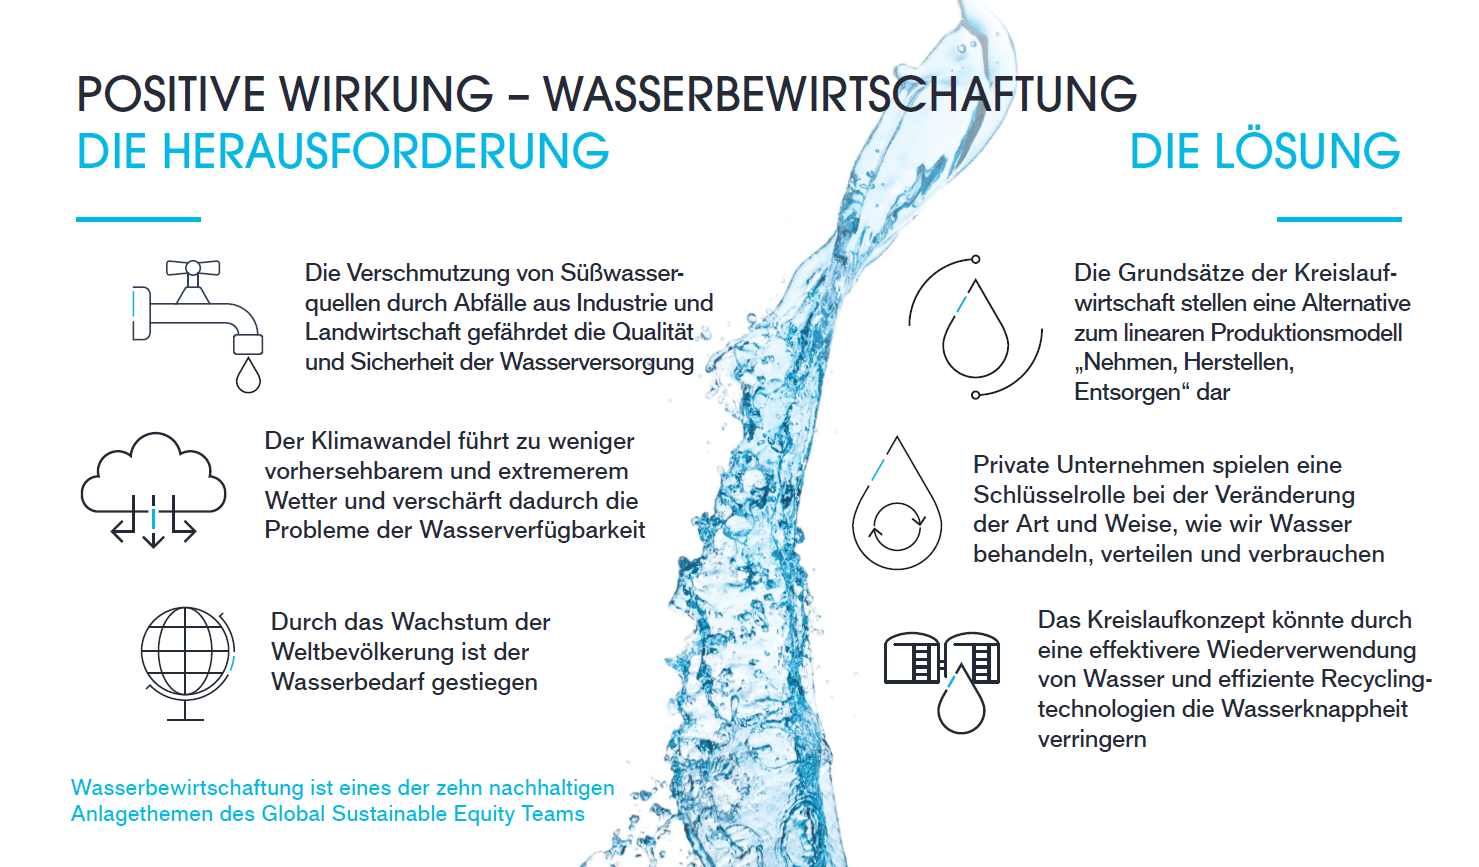 article-image_meeting-the-need-for-a-sustainable-and-resilient-water-system_chart1_de